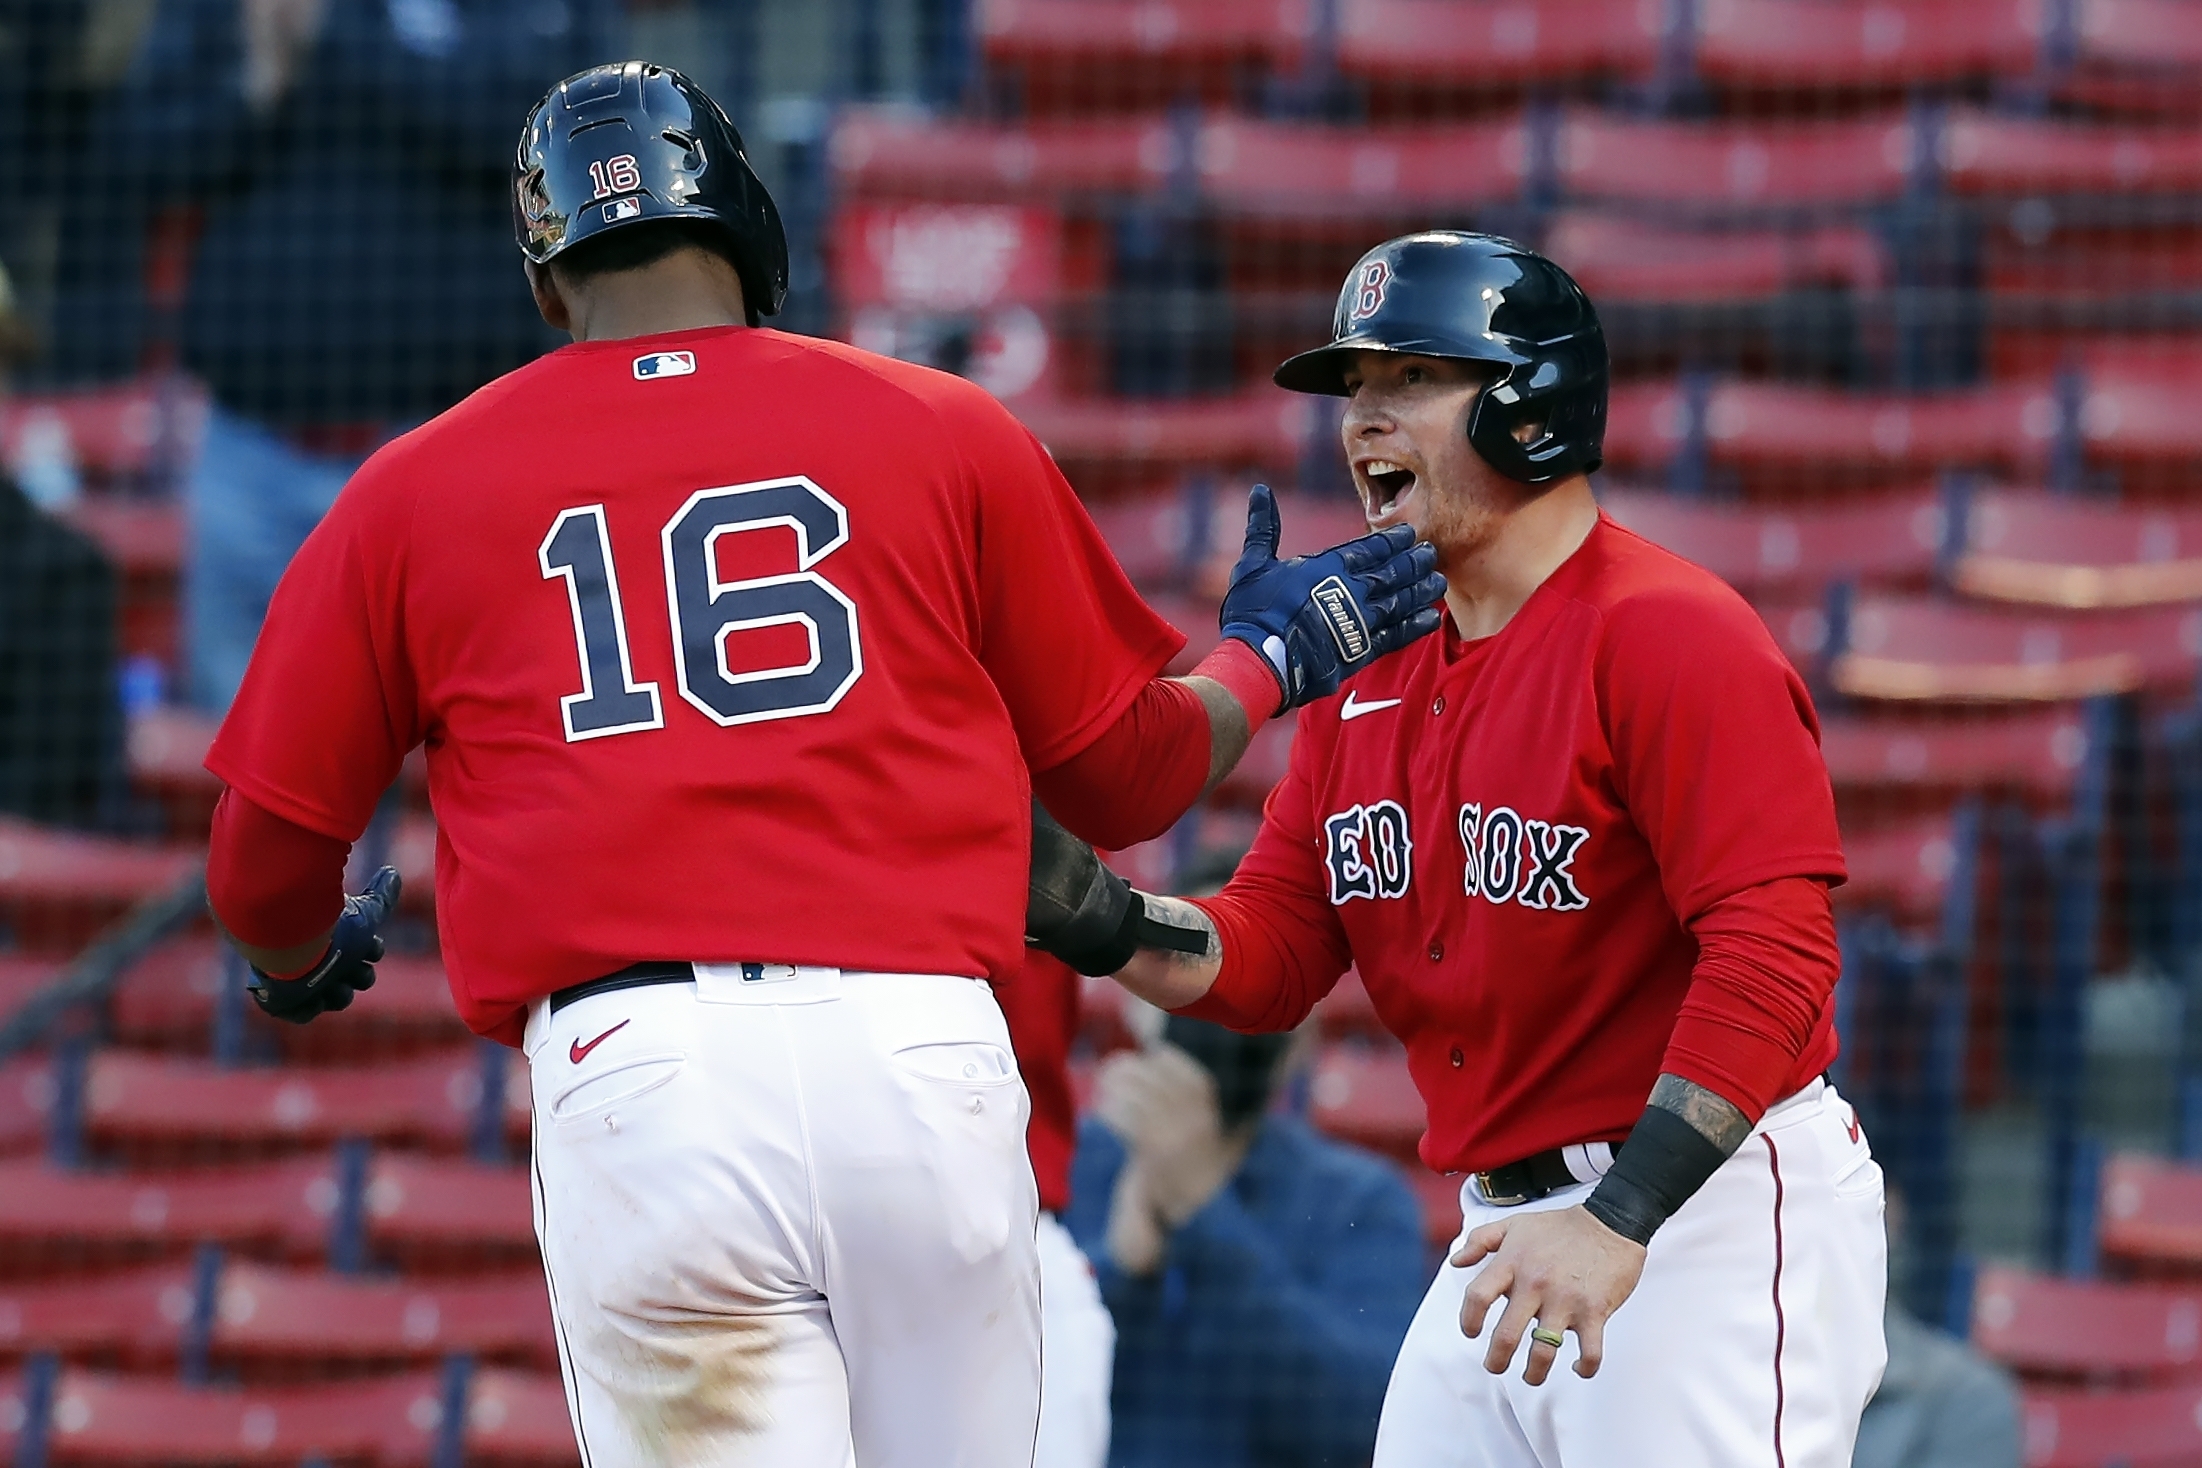 Boston Red Sox notebook: Bobby Dalbec's slump (0-for-27) continues